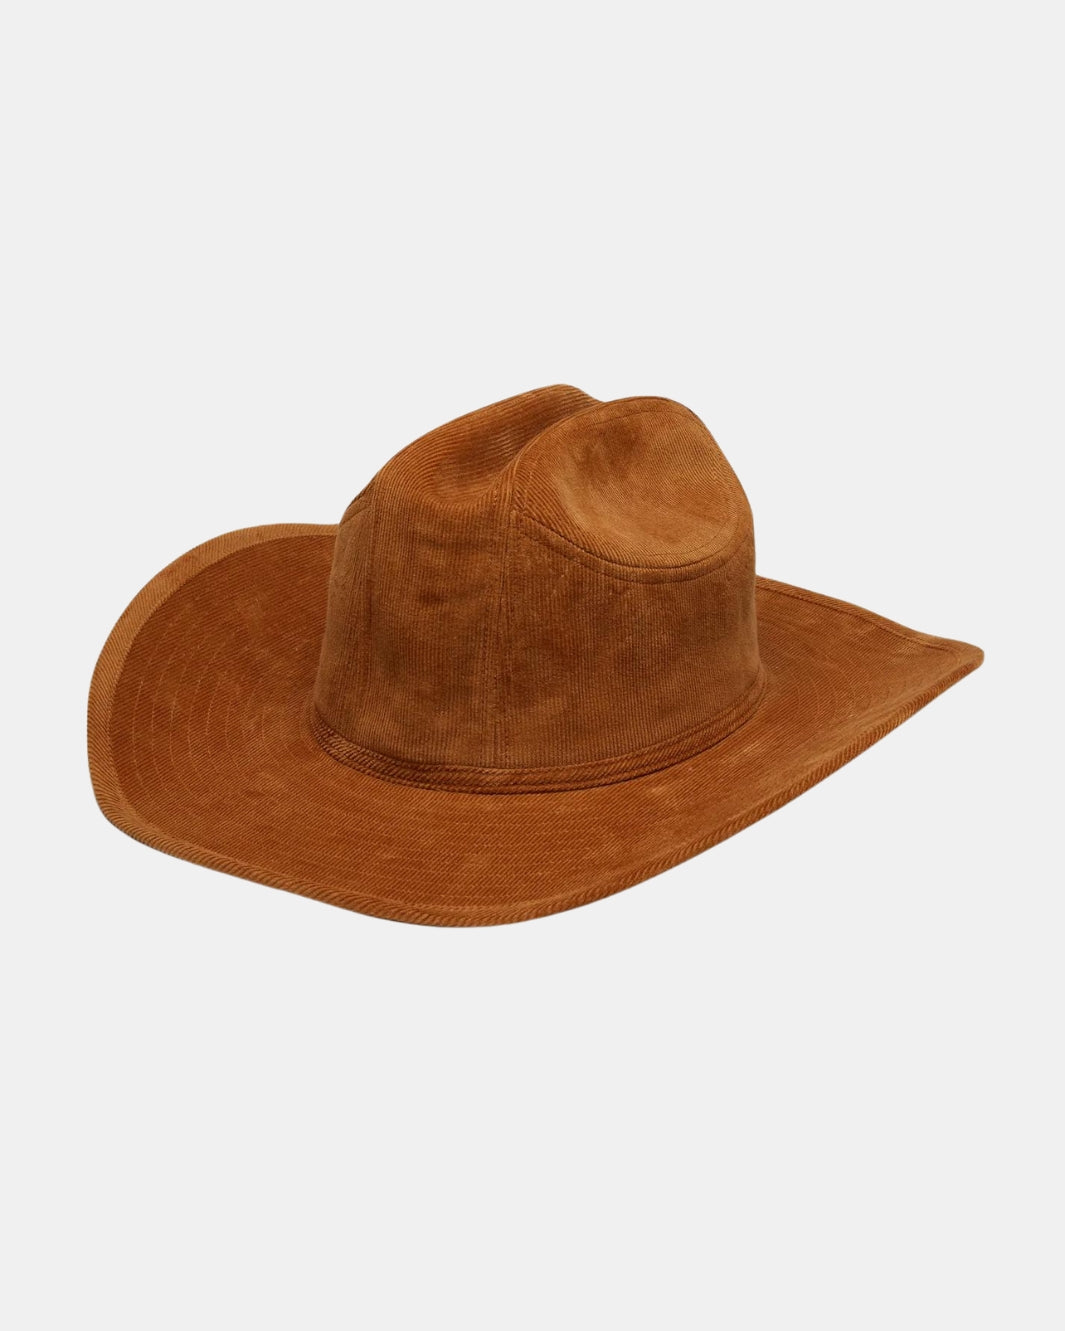 CANYON HAT IN CAMEL - Romi Boutique